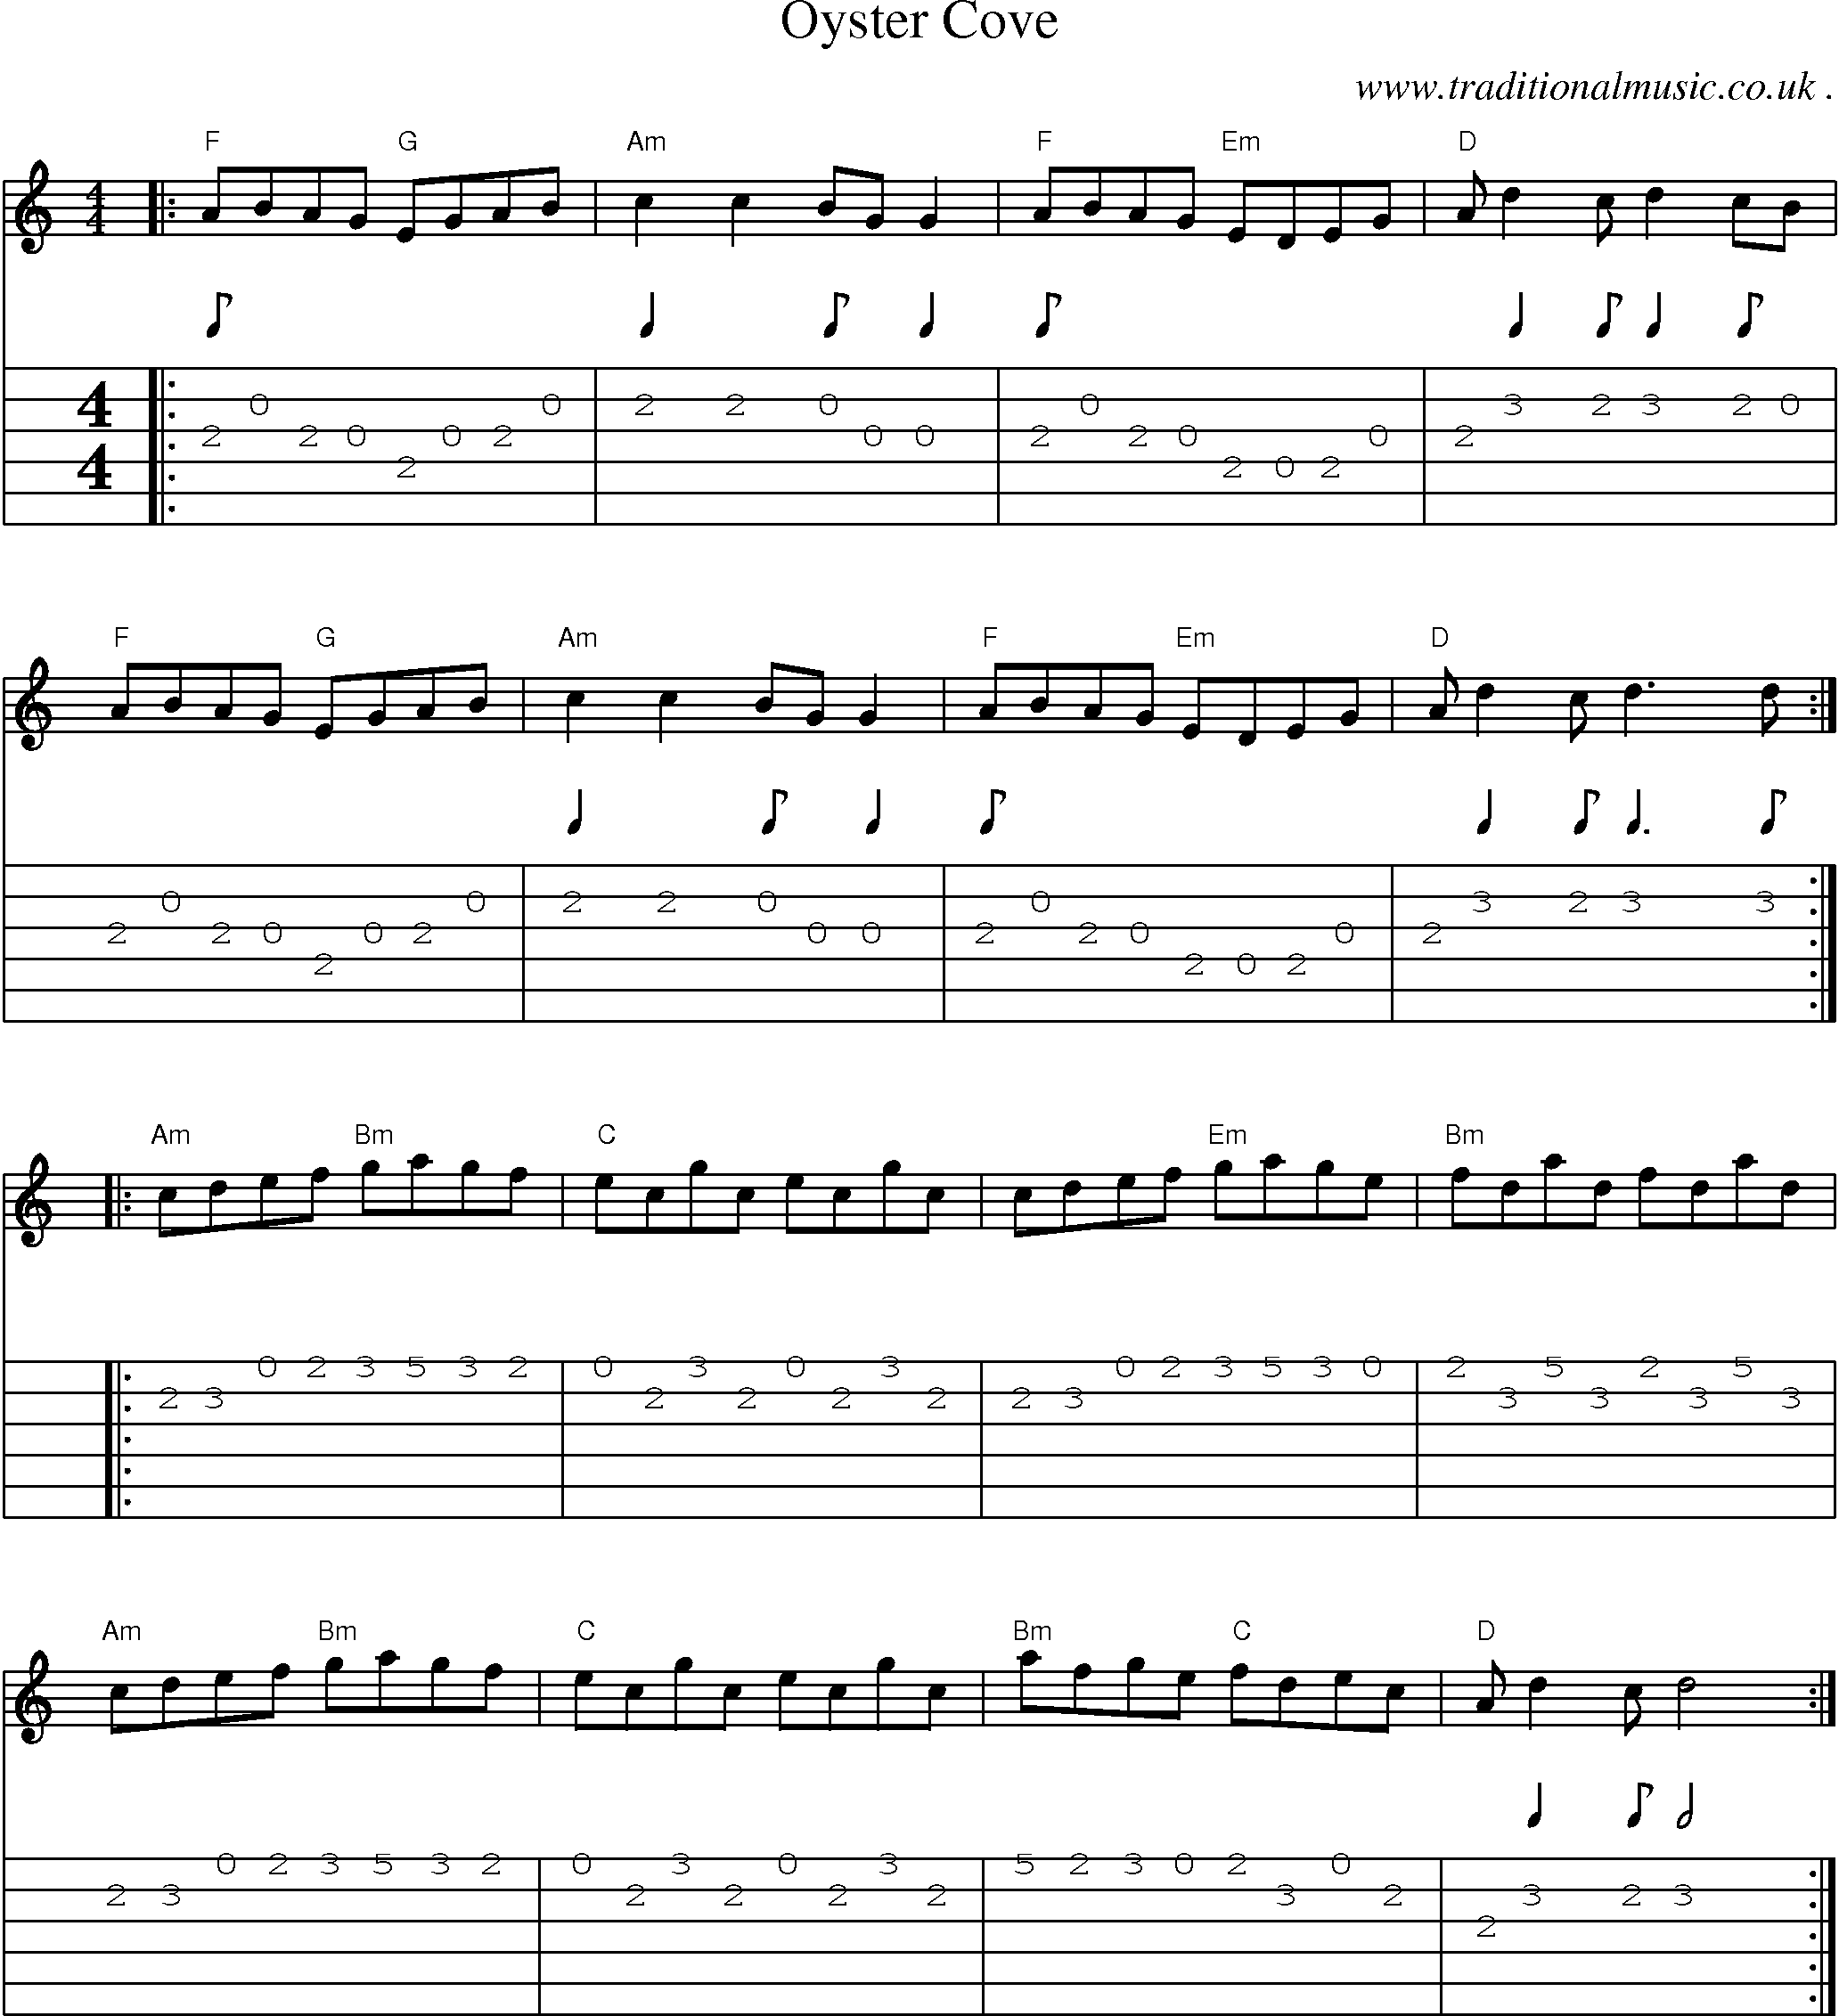 Music Score and Guitar Tabs for Oyster Cove